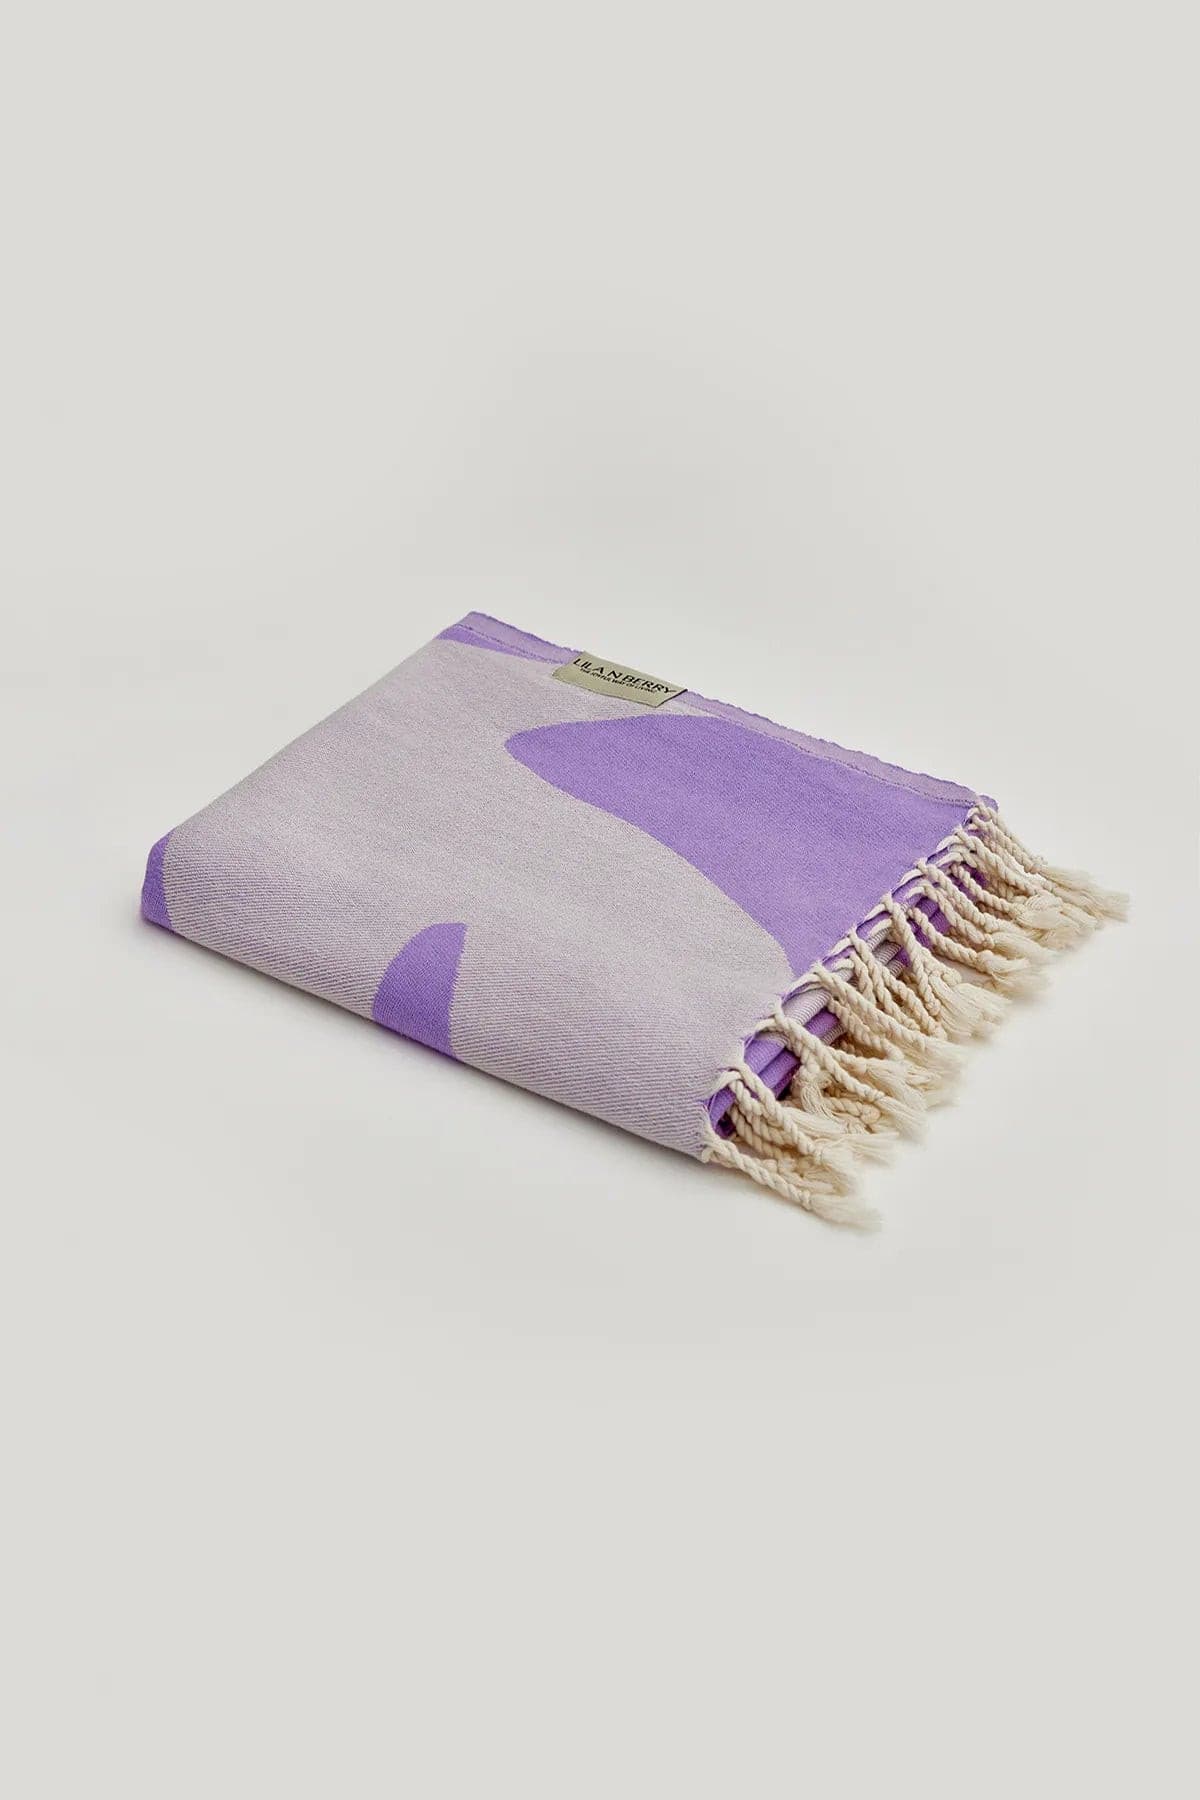 Beach/Bath,living place,Lilac,Turkish towel, folded,summer,line patterned,double-faces,purified sand,light,compact, easy pack,fun, recycled,double color,dimond,eastern flare,breeze,tropical forest